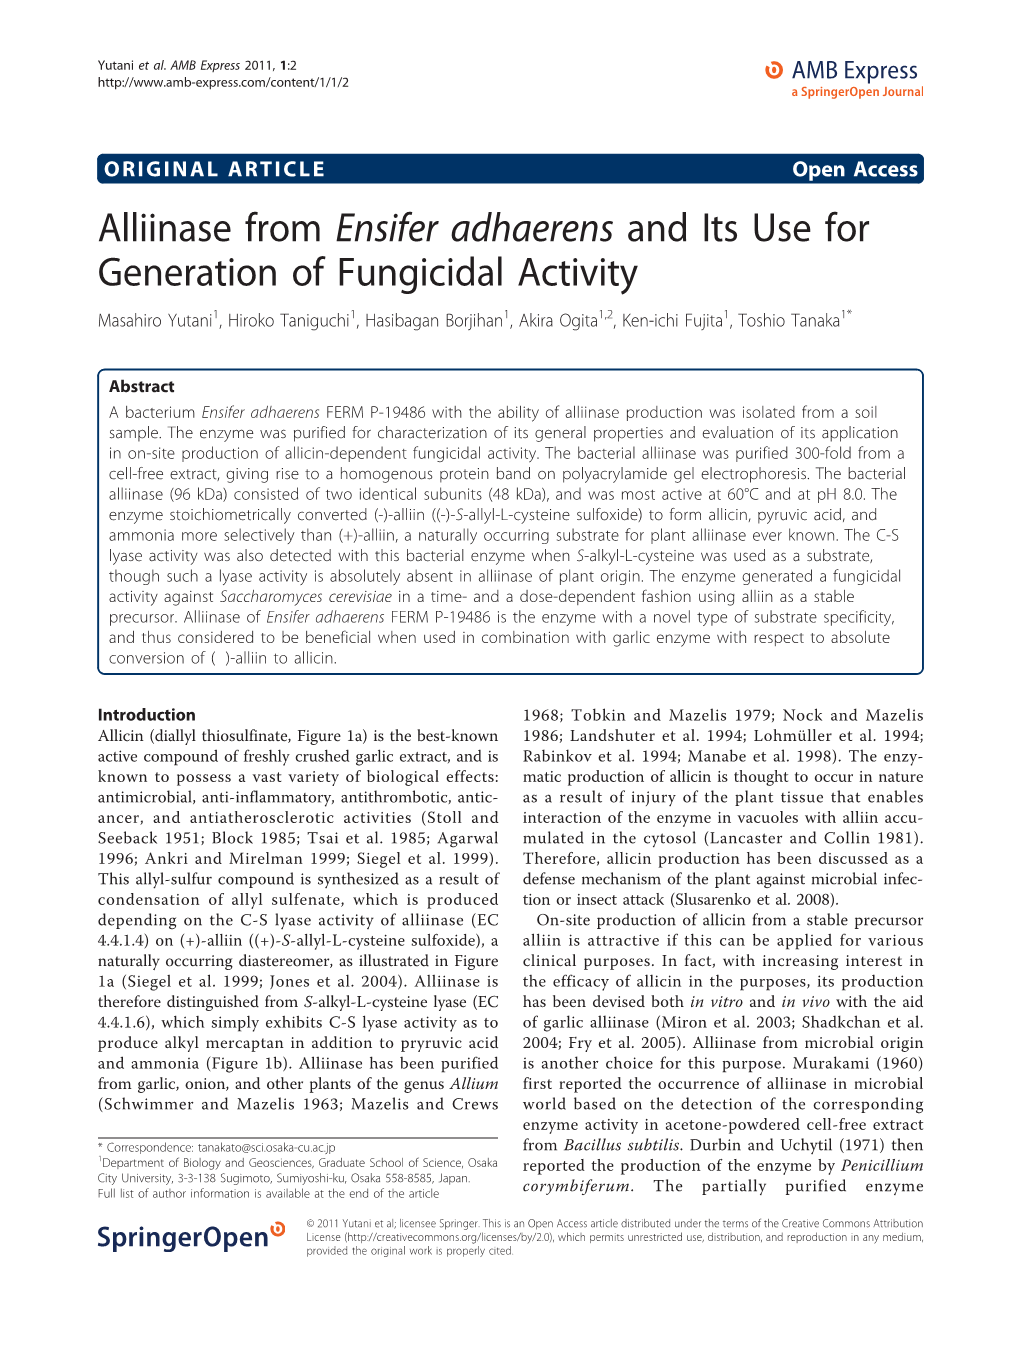 Alliinase from Ensifer Adhaerens and Its Use for Generation of Fungicidal